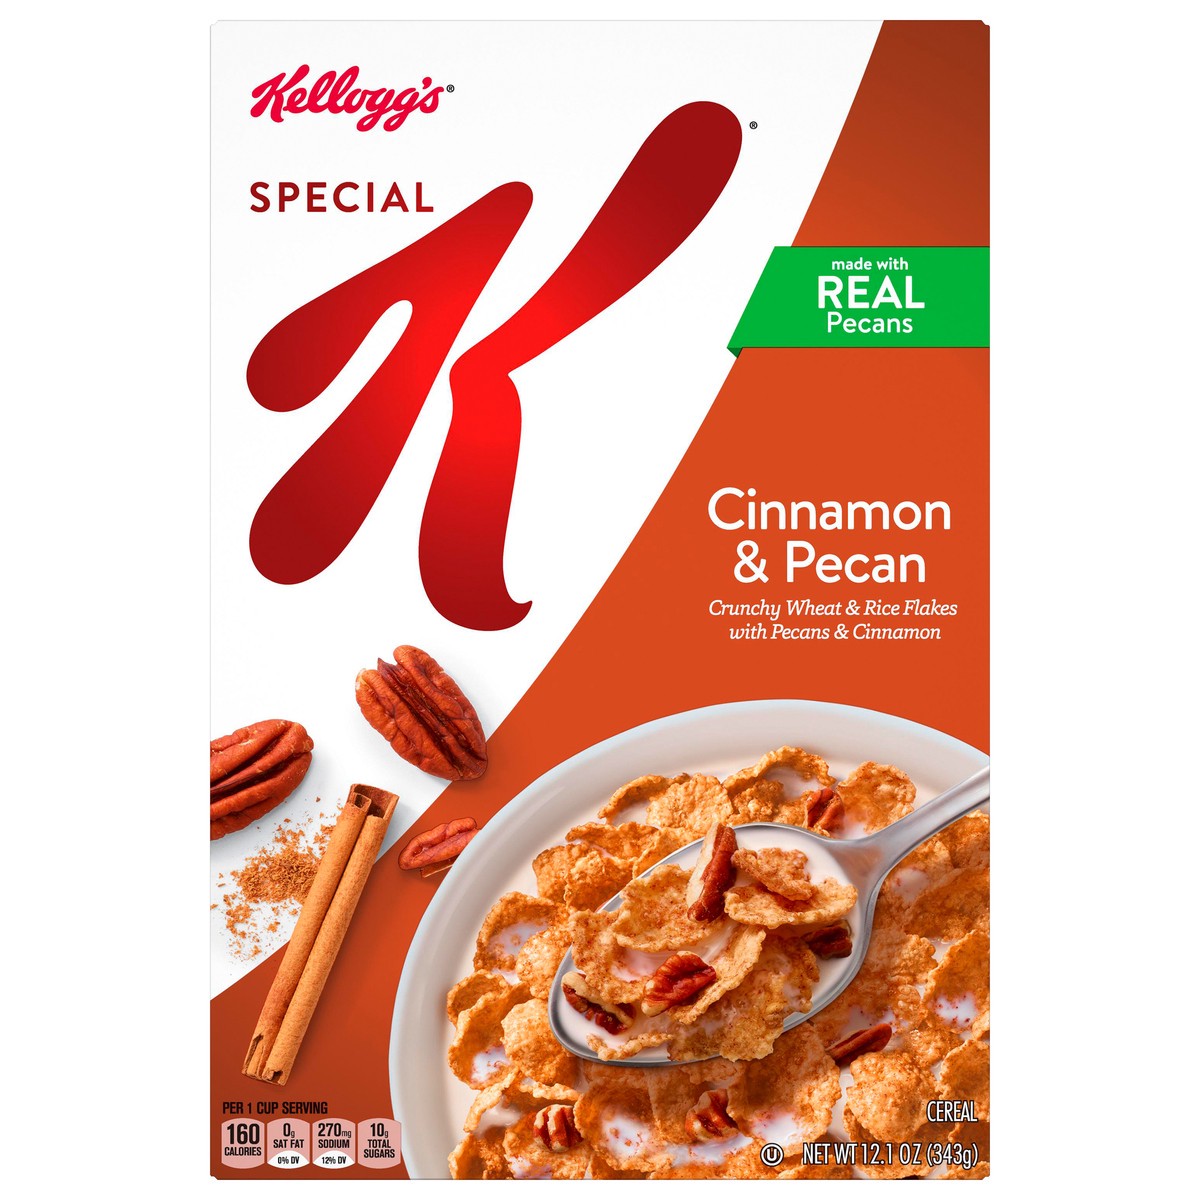 slide 1 of 5, Special K Kellogg''s Special K Breakfast Cereal, 11 Vitamins and Minerals, Made with Real Pecans, Cinnamon and Pecan, 12.1oz Box, 1 Box, 12.1 oz